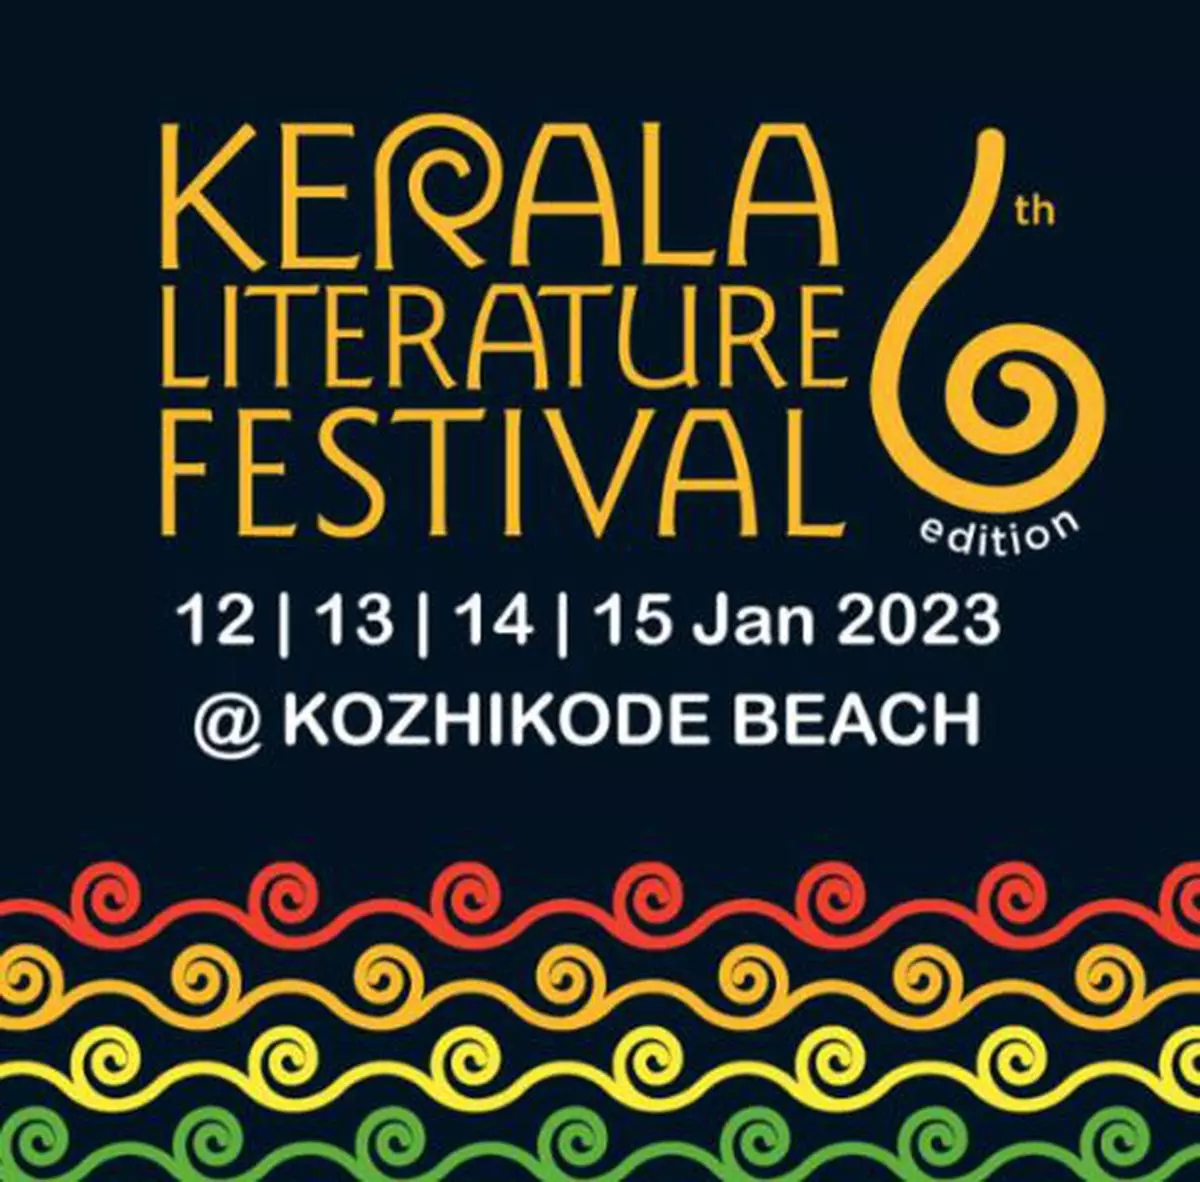 Kerala Literature Festival 2023 to be held from Jan 12-15